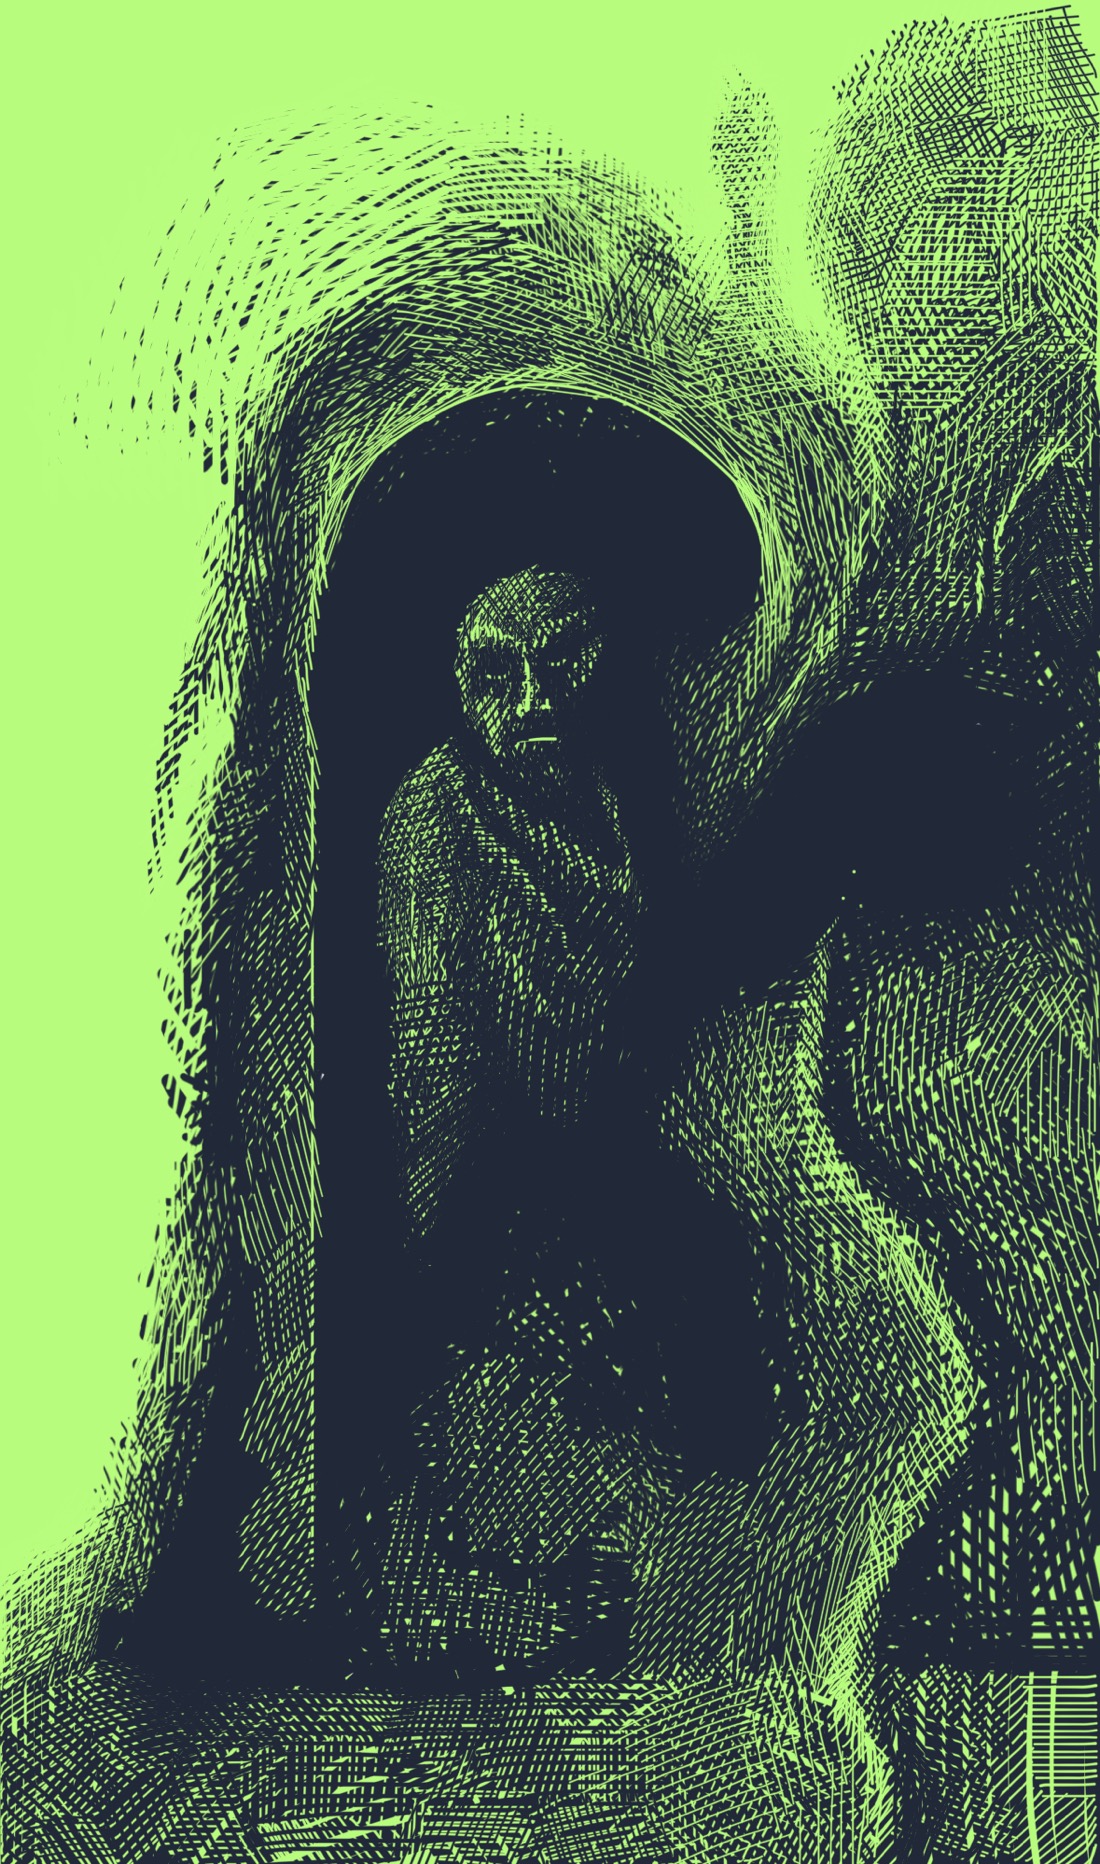 A chaotic surface that suggests a partially melted wall with an arched doorway in it. Standing in the doorway, staring out, is someone whose face is darkened by shadows. The person looks like they are wearing a robe, and has a shaved head and two intense, staring eyes.